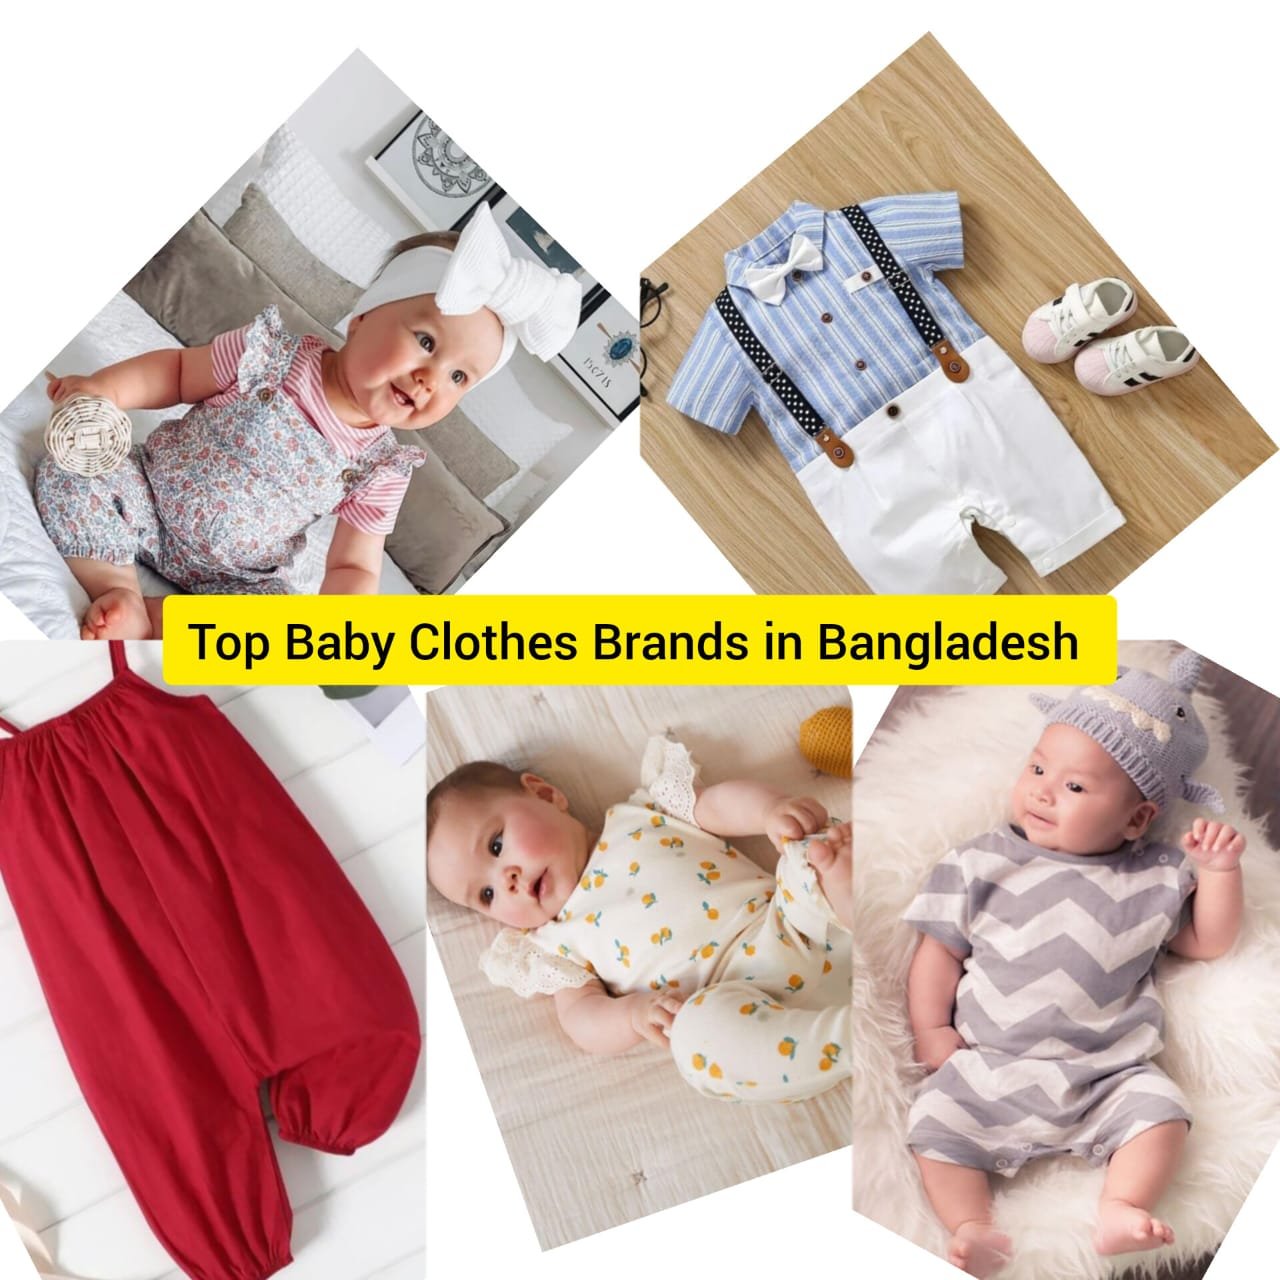 BABY CLOTHING BRANDS IN BANGLADESH